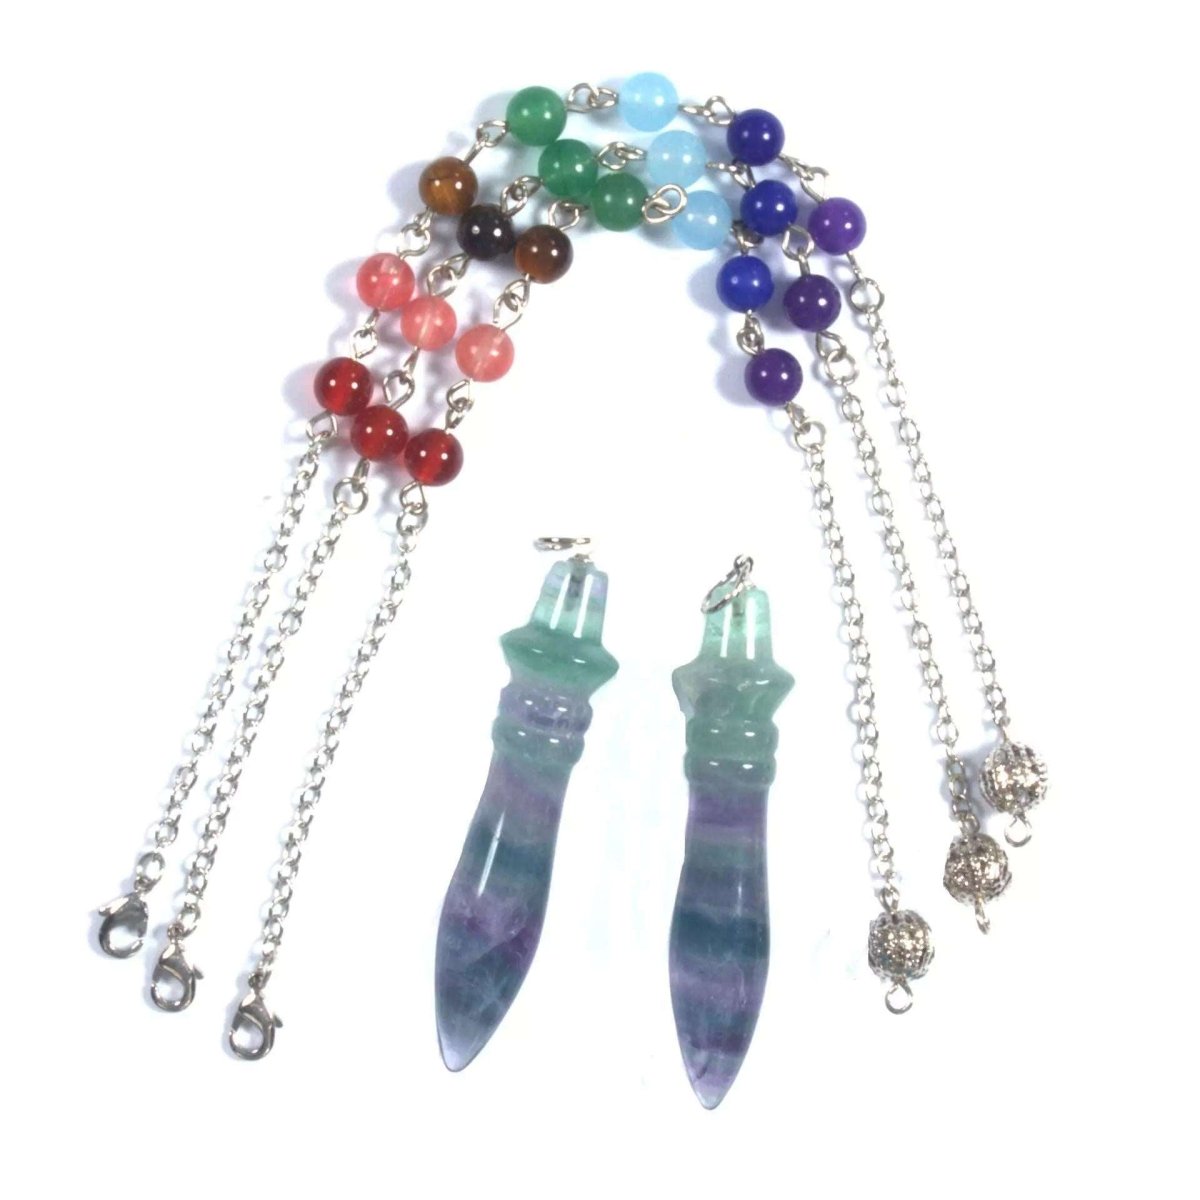 7 Chakra Fluorite Pendulum - Natural Crystal for Divination and Energy Healing - HigherFrequencies